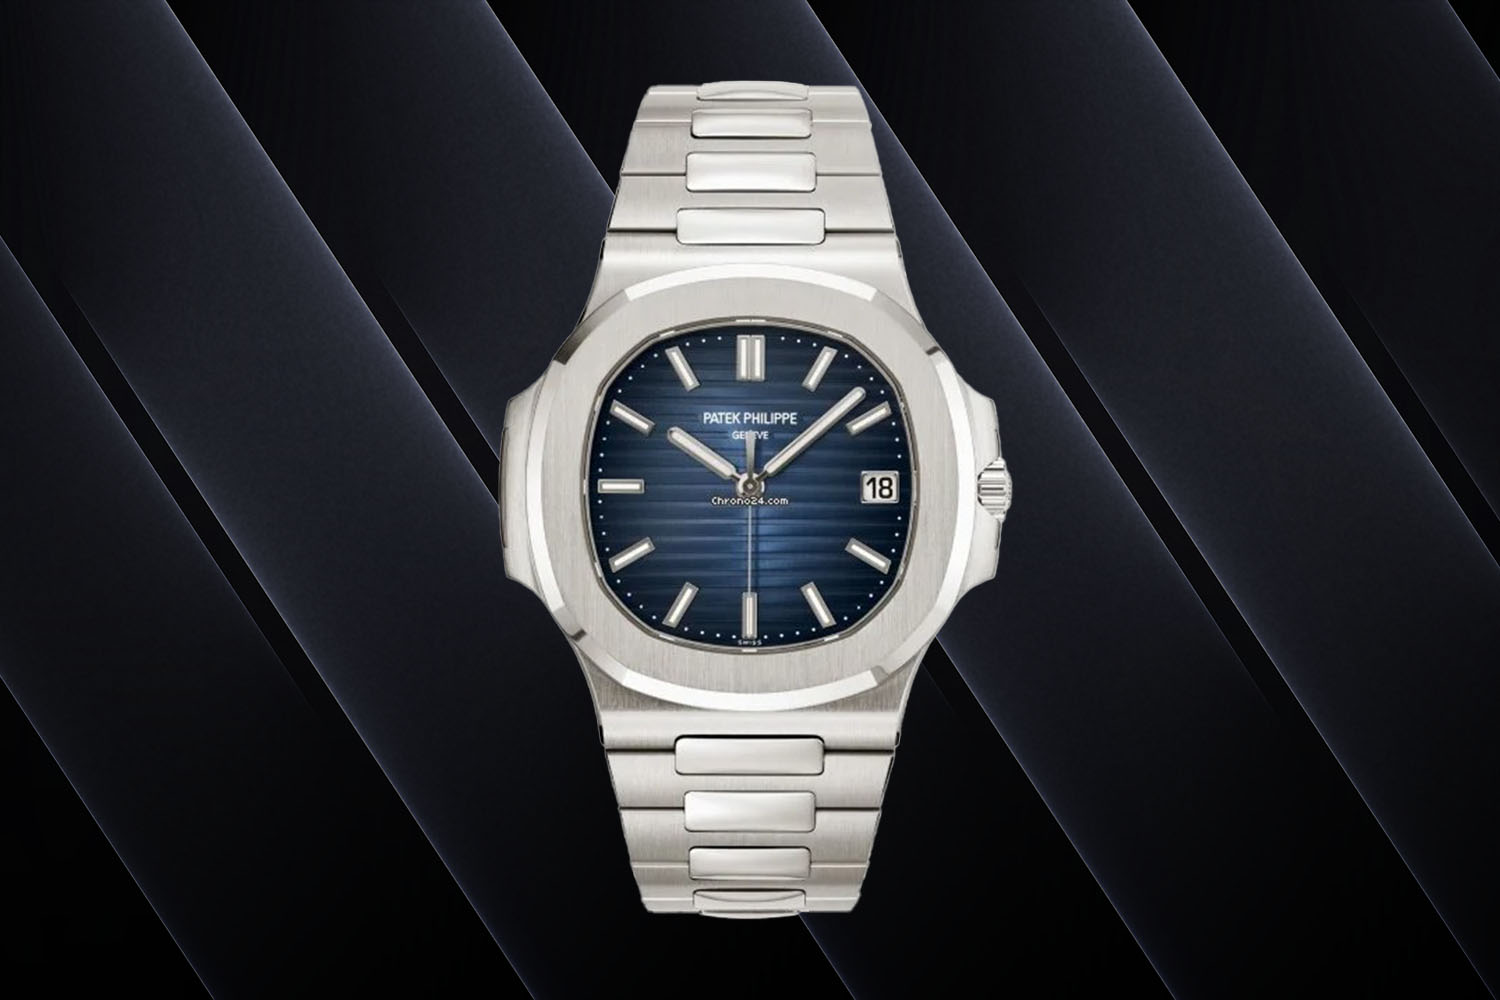 The Patek Philippe Nautilus is one of the best luxury sports watches